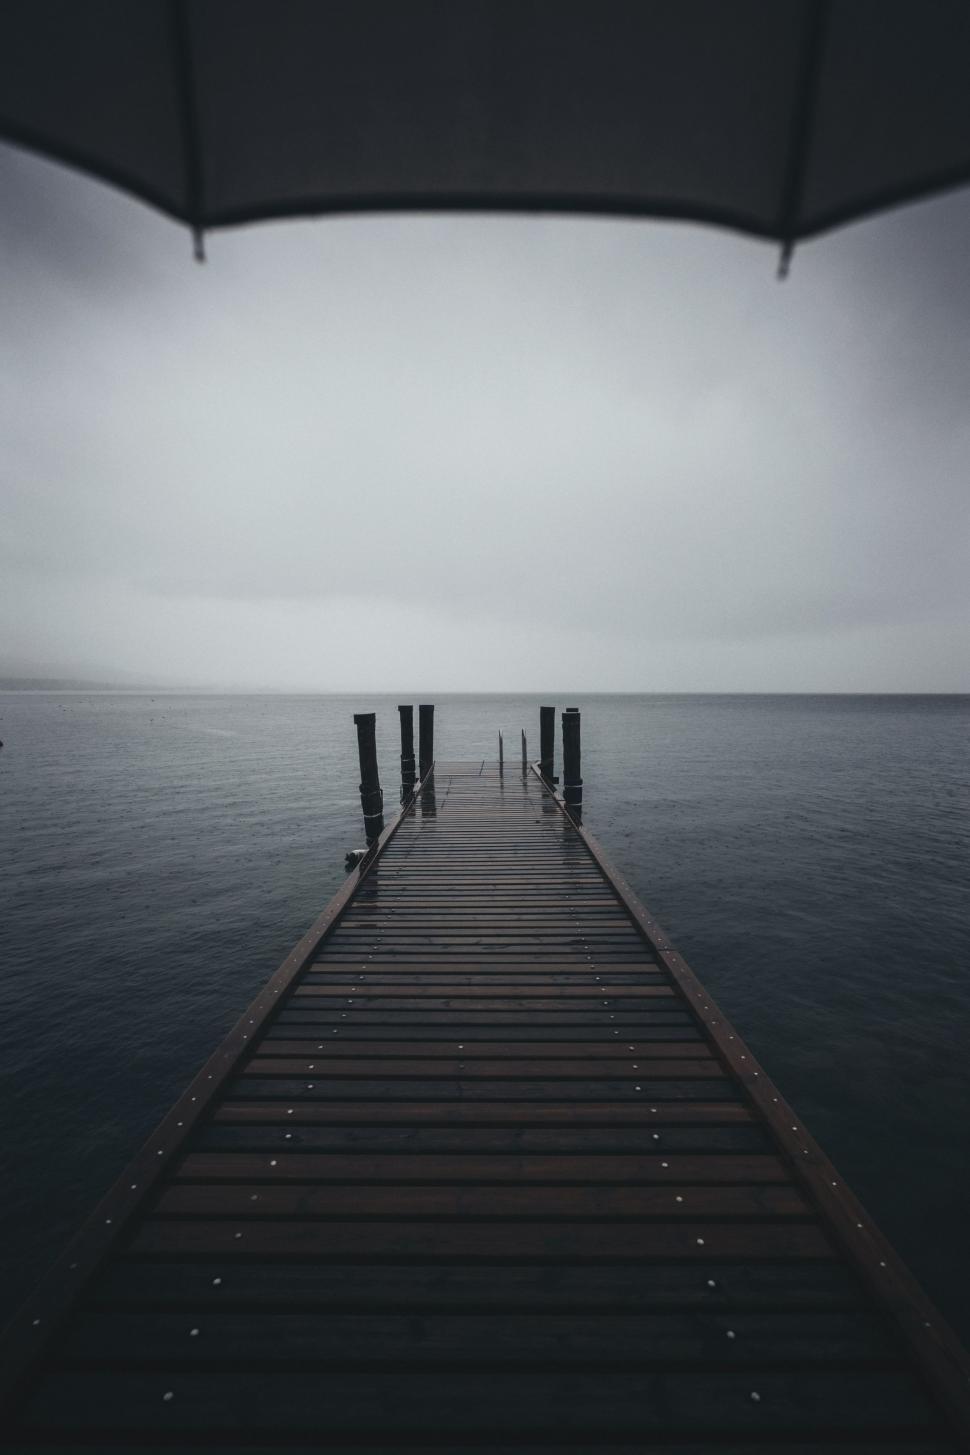 Free Image of Long Pier Extending Into the Ocean Under a Cloudy Sky 